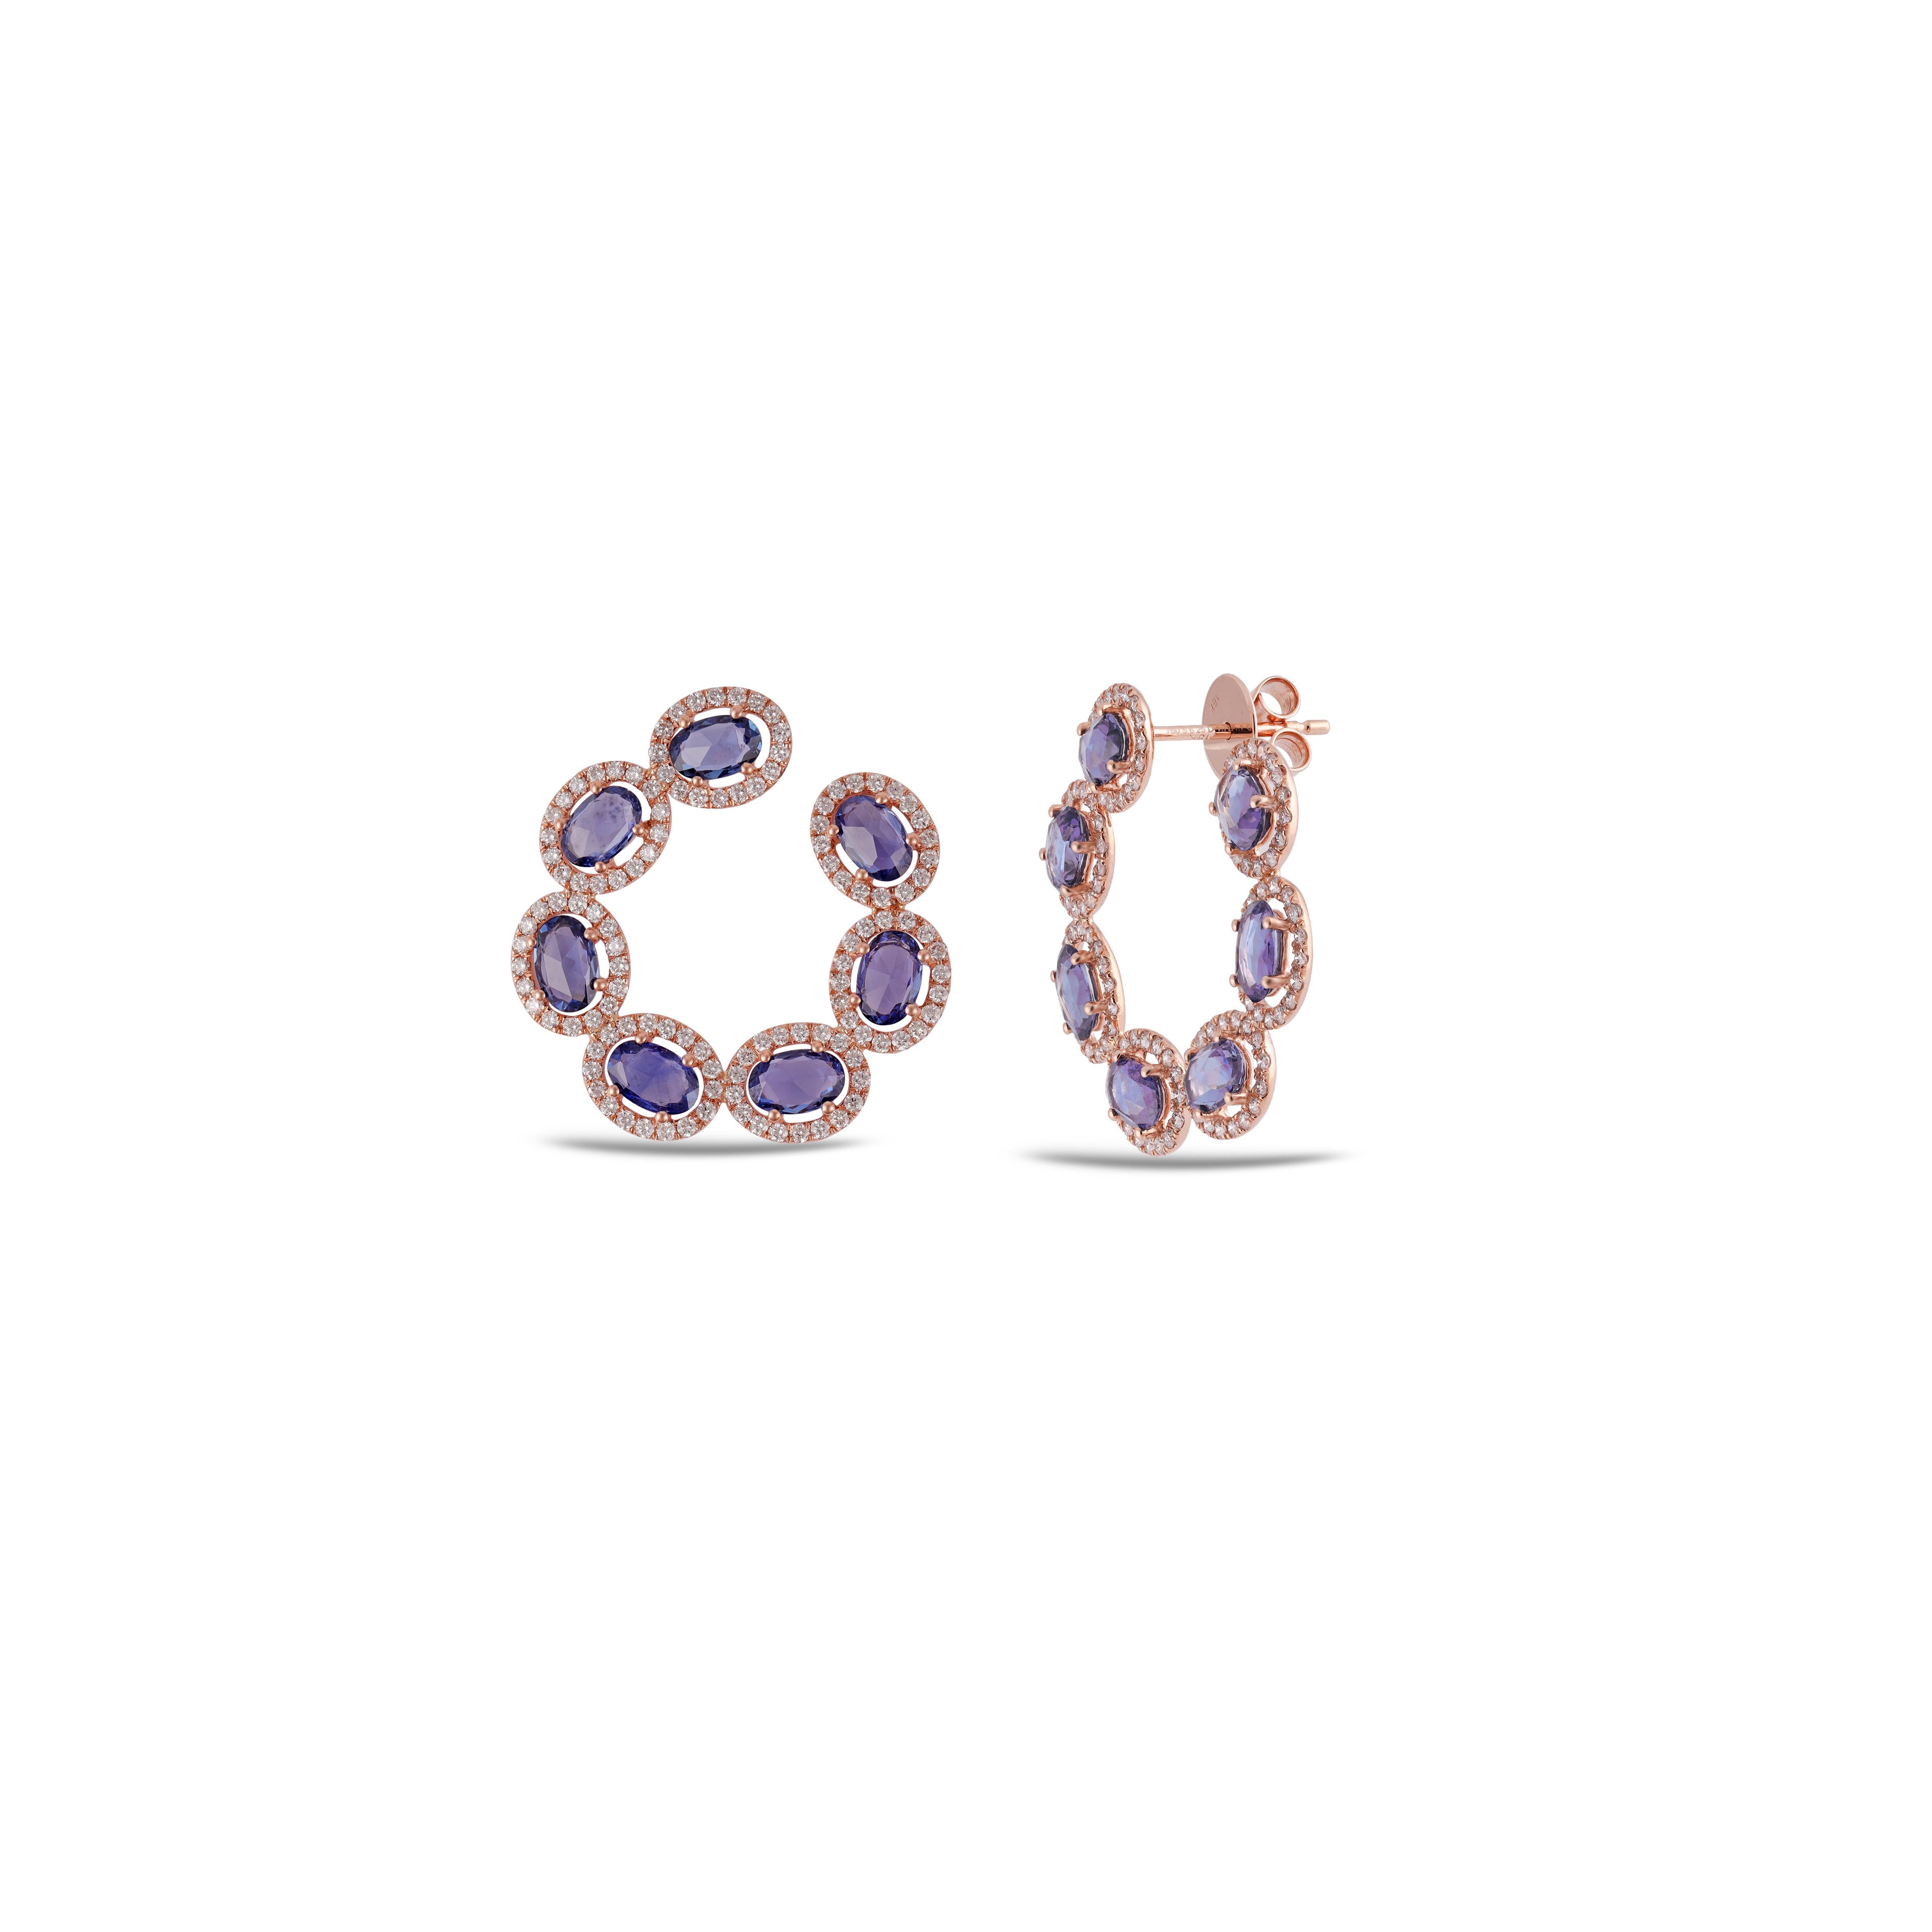 Contemporary 6.25 Carat  Blue Sapphire Earrings in Rose Gold with Diamonds.  For Sale